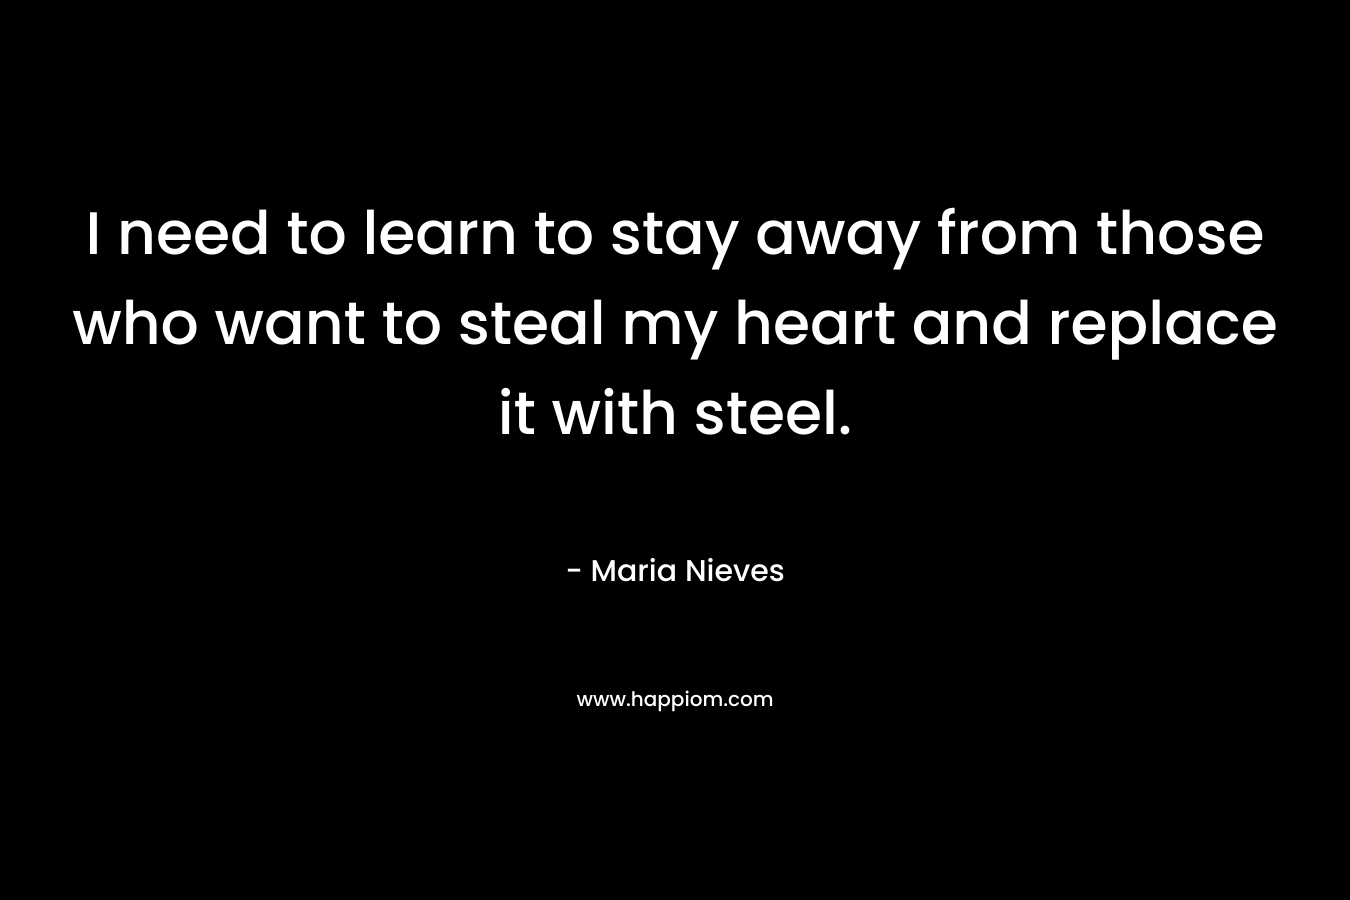 I need to learn to stay away from those who want to steal my heart and replace it with steel. – Maria Nieves